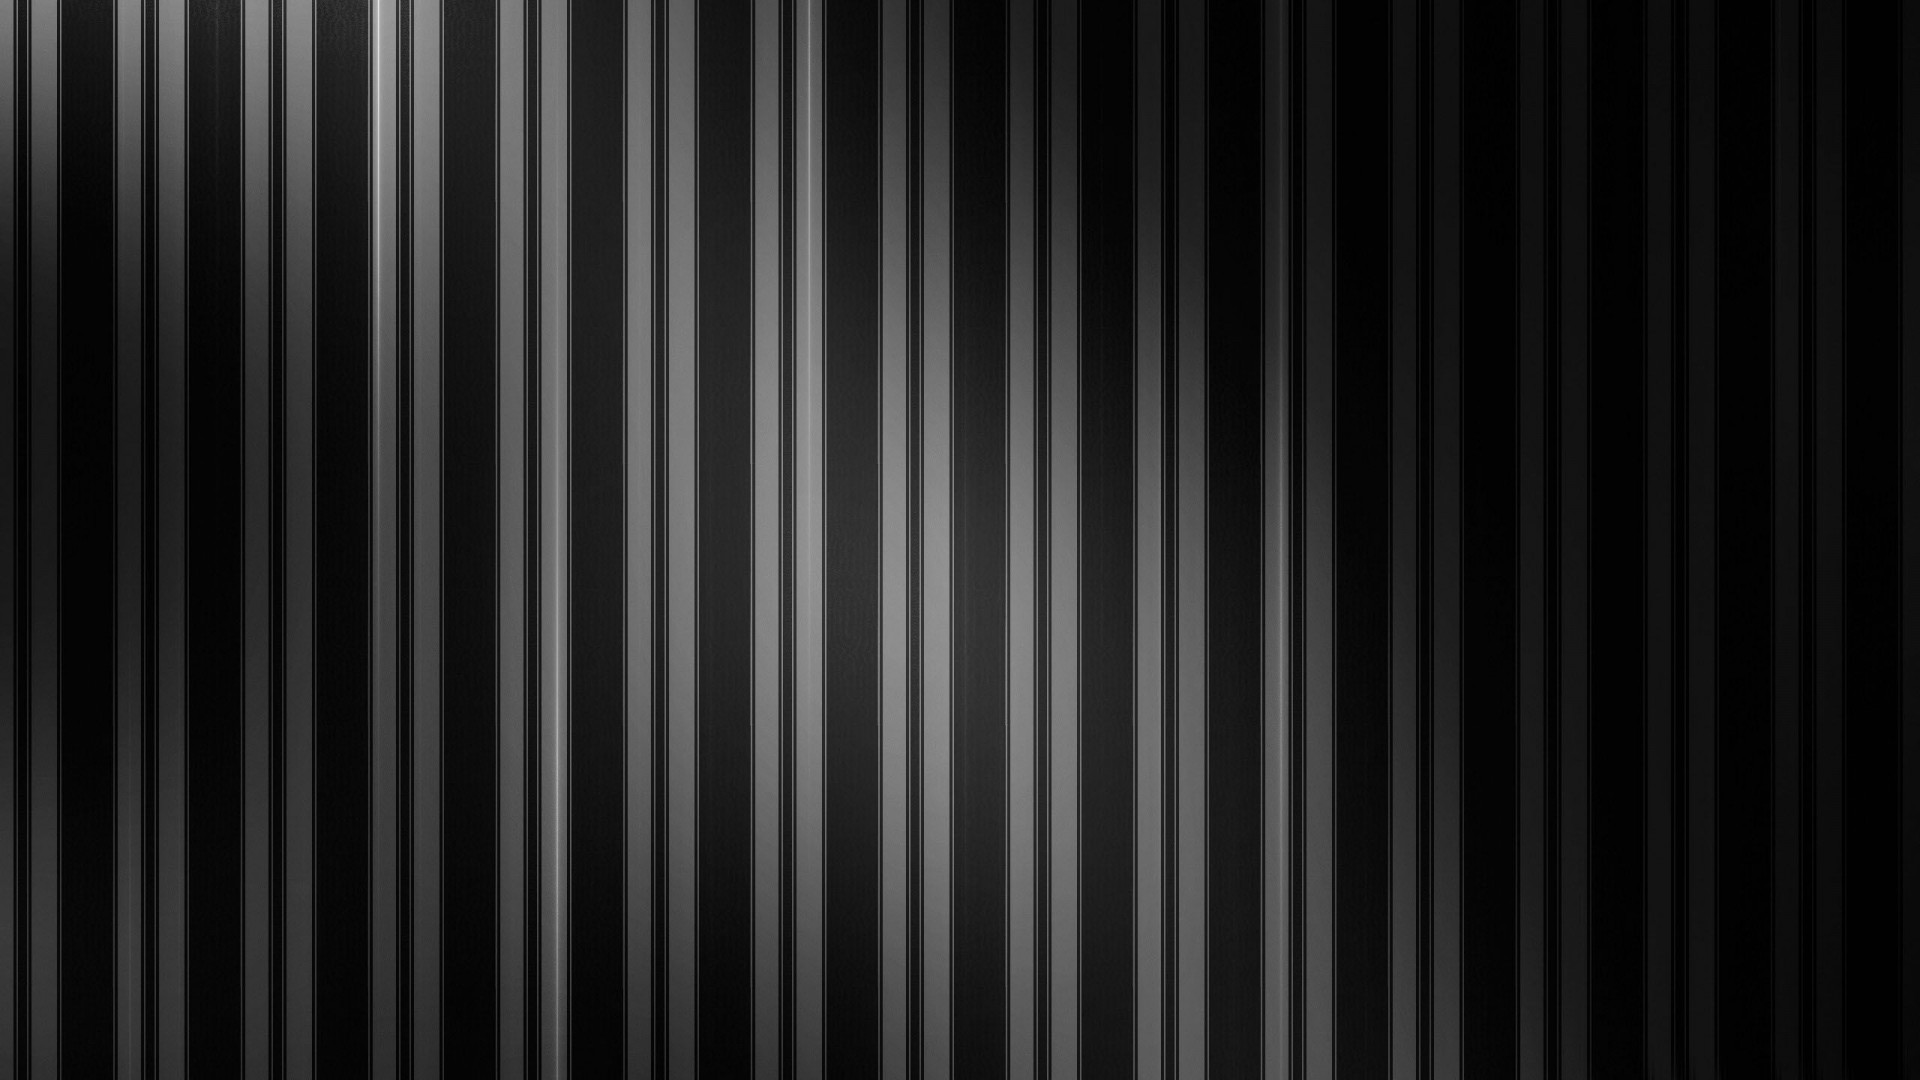 Cool Black And White Striped Backgrounds Black stripes wallpaper